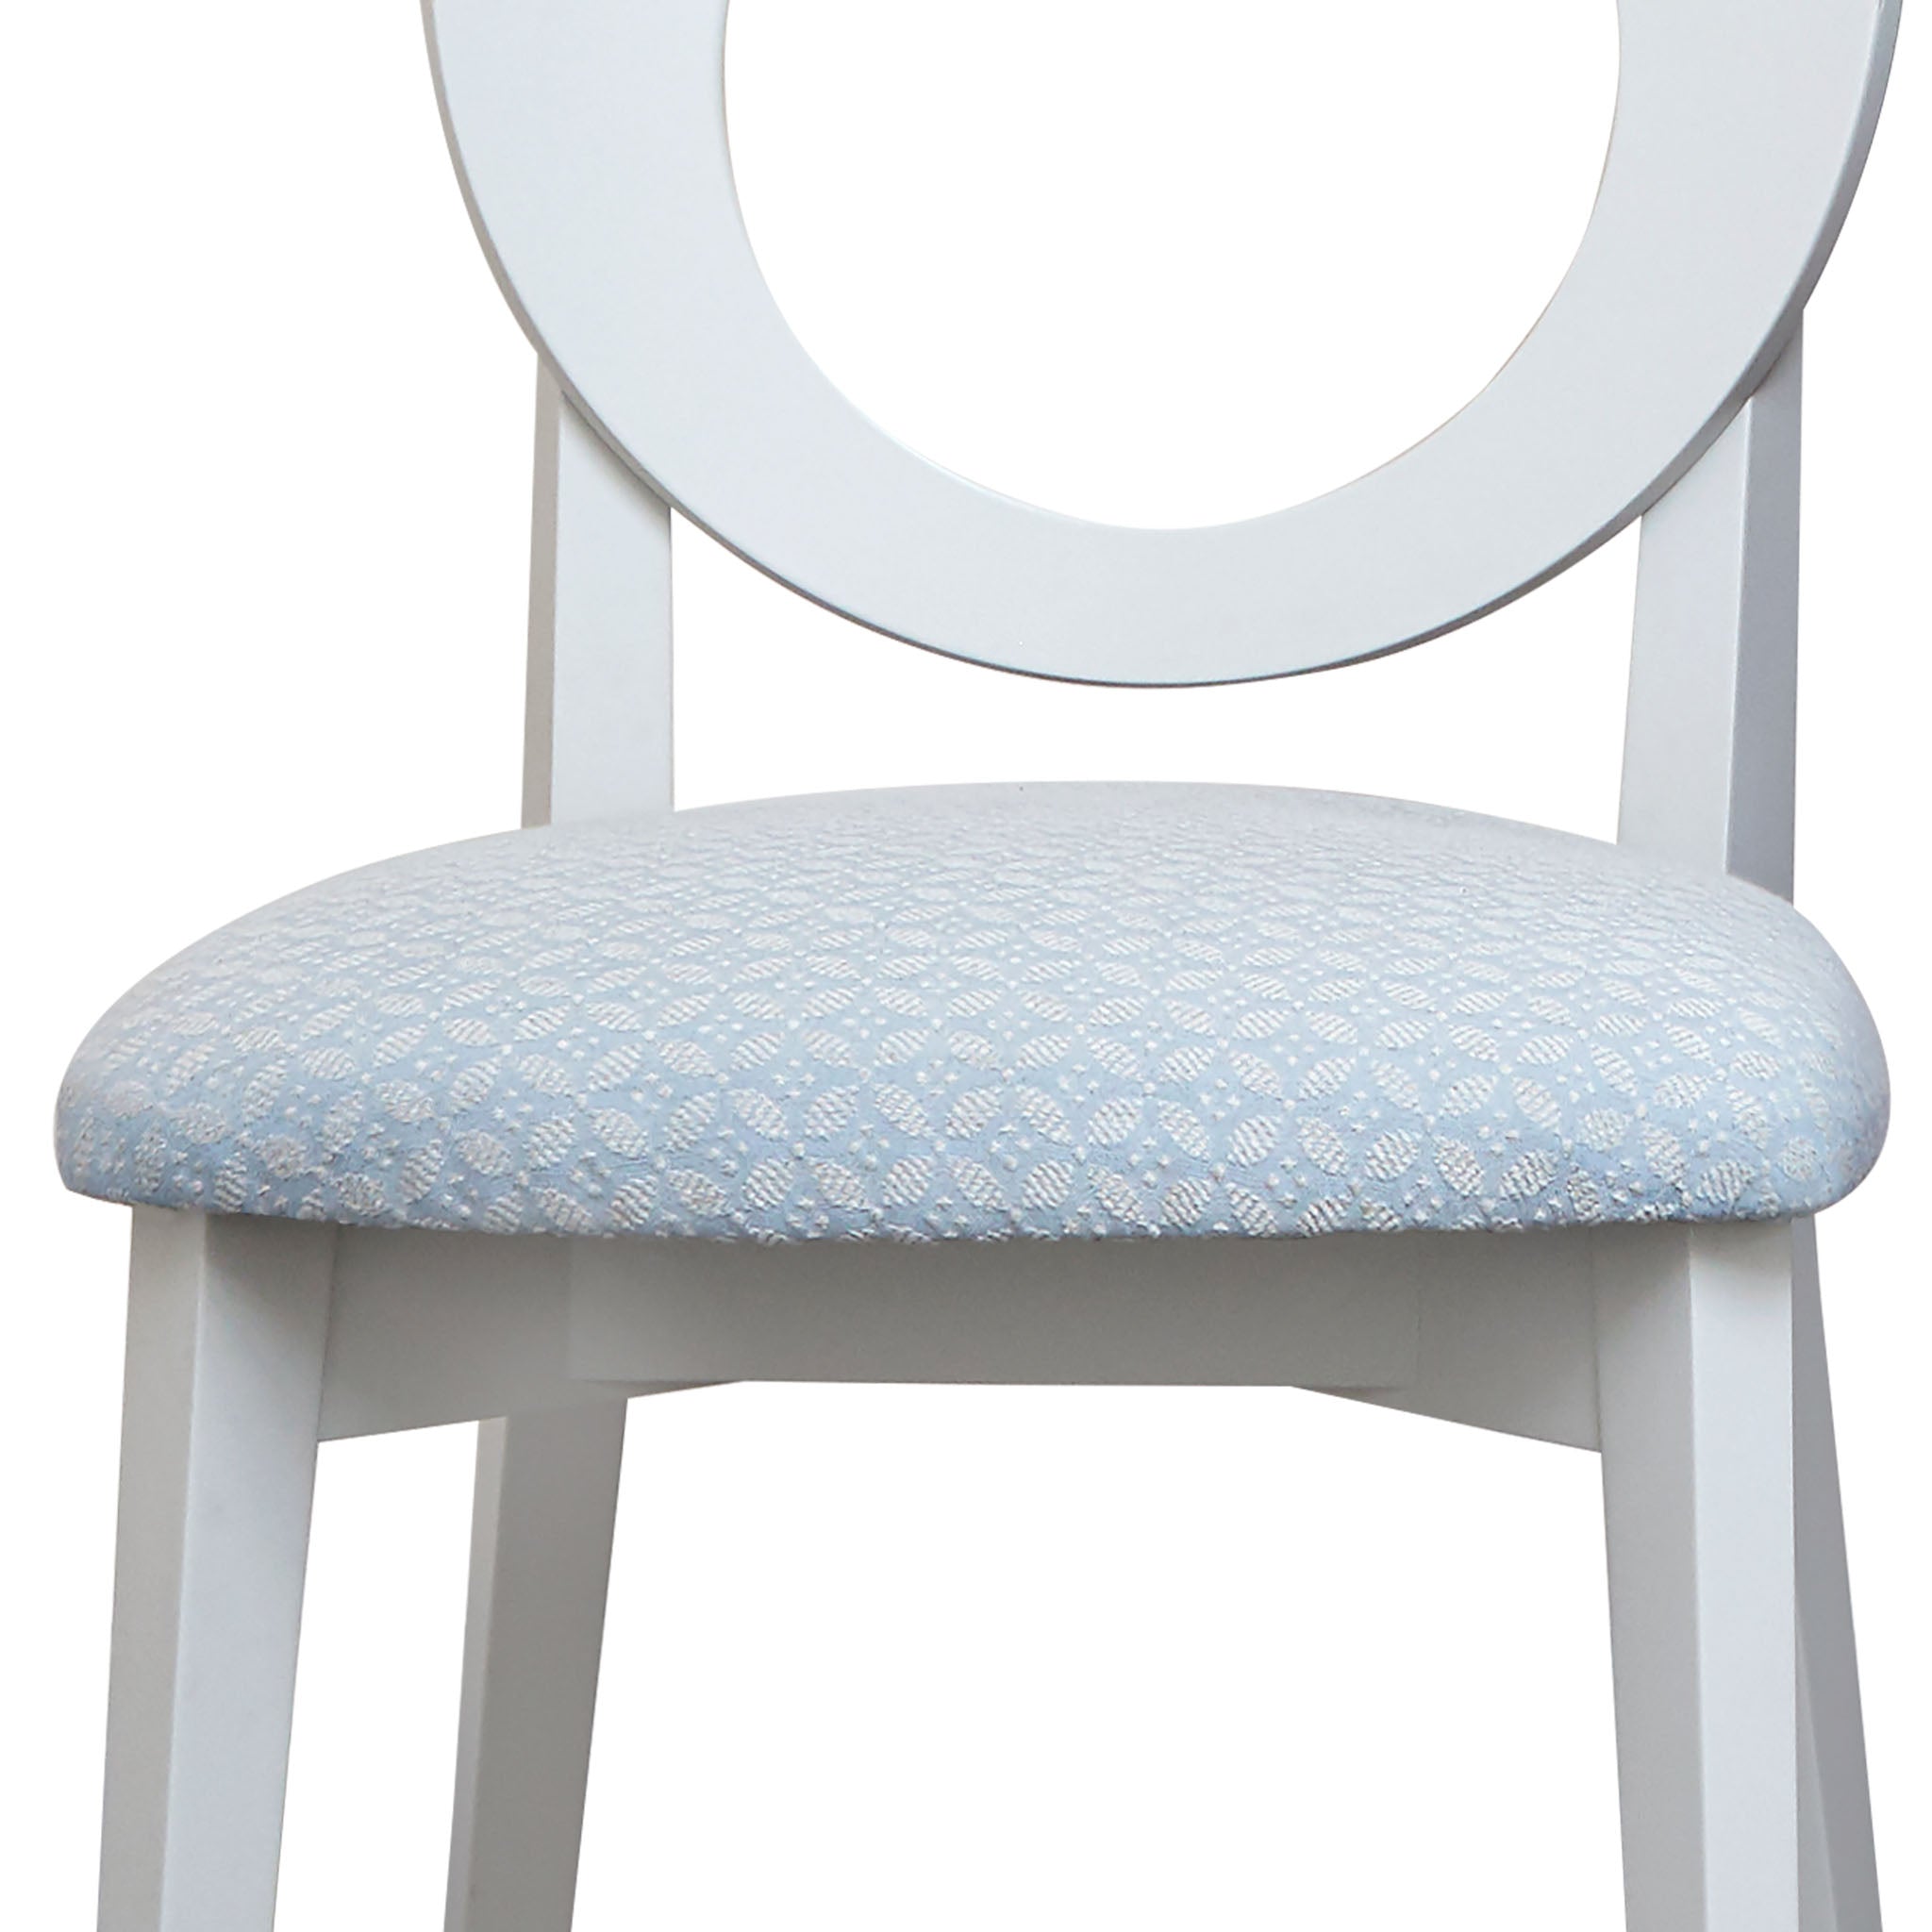 Chloe Dining Chair upholstered in Hastings Bluebell from Northcroft